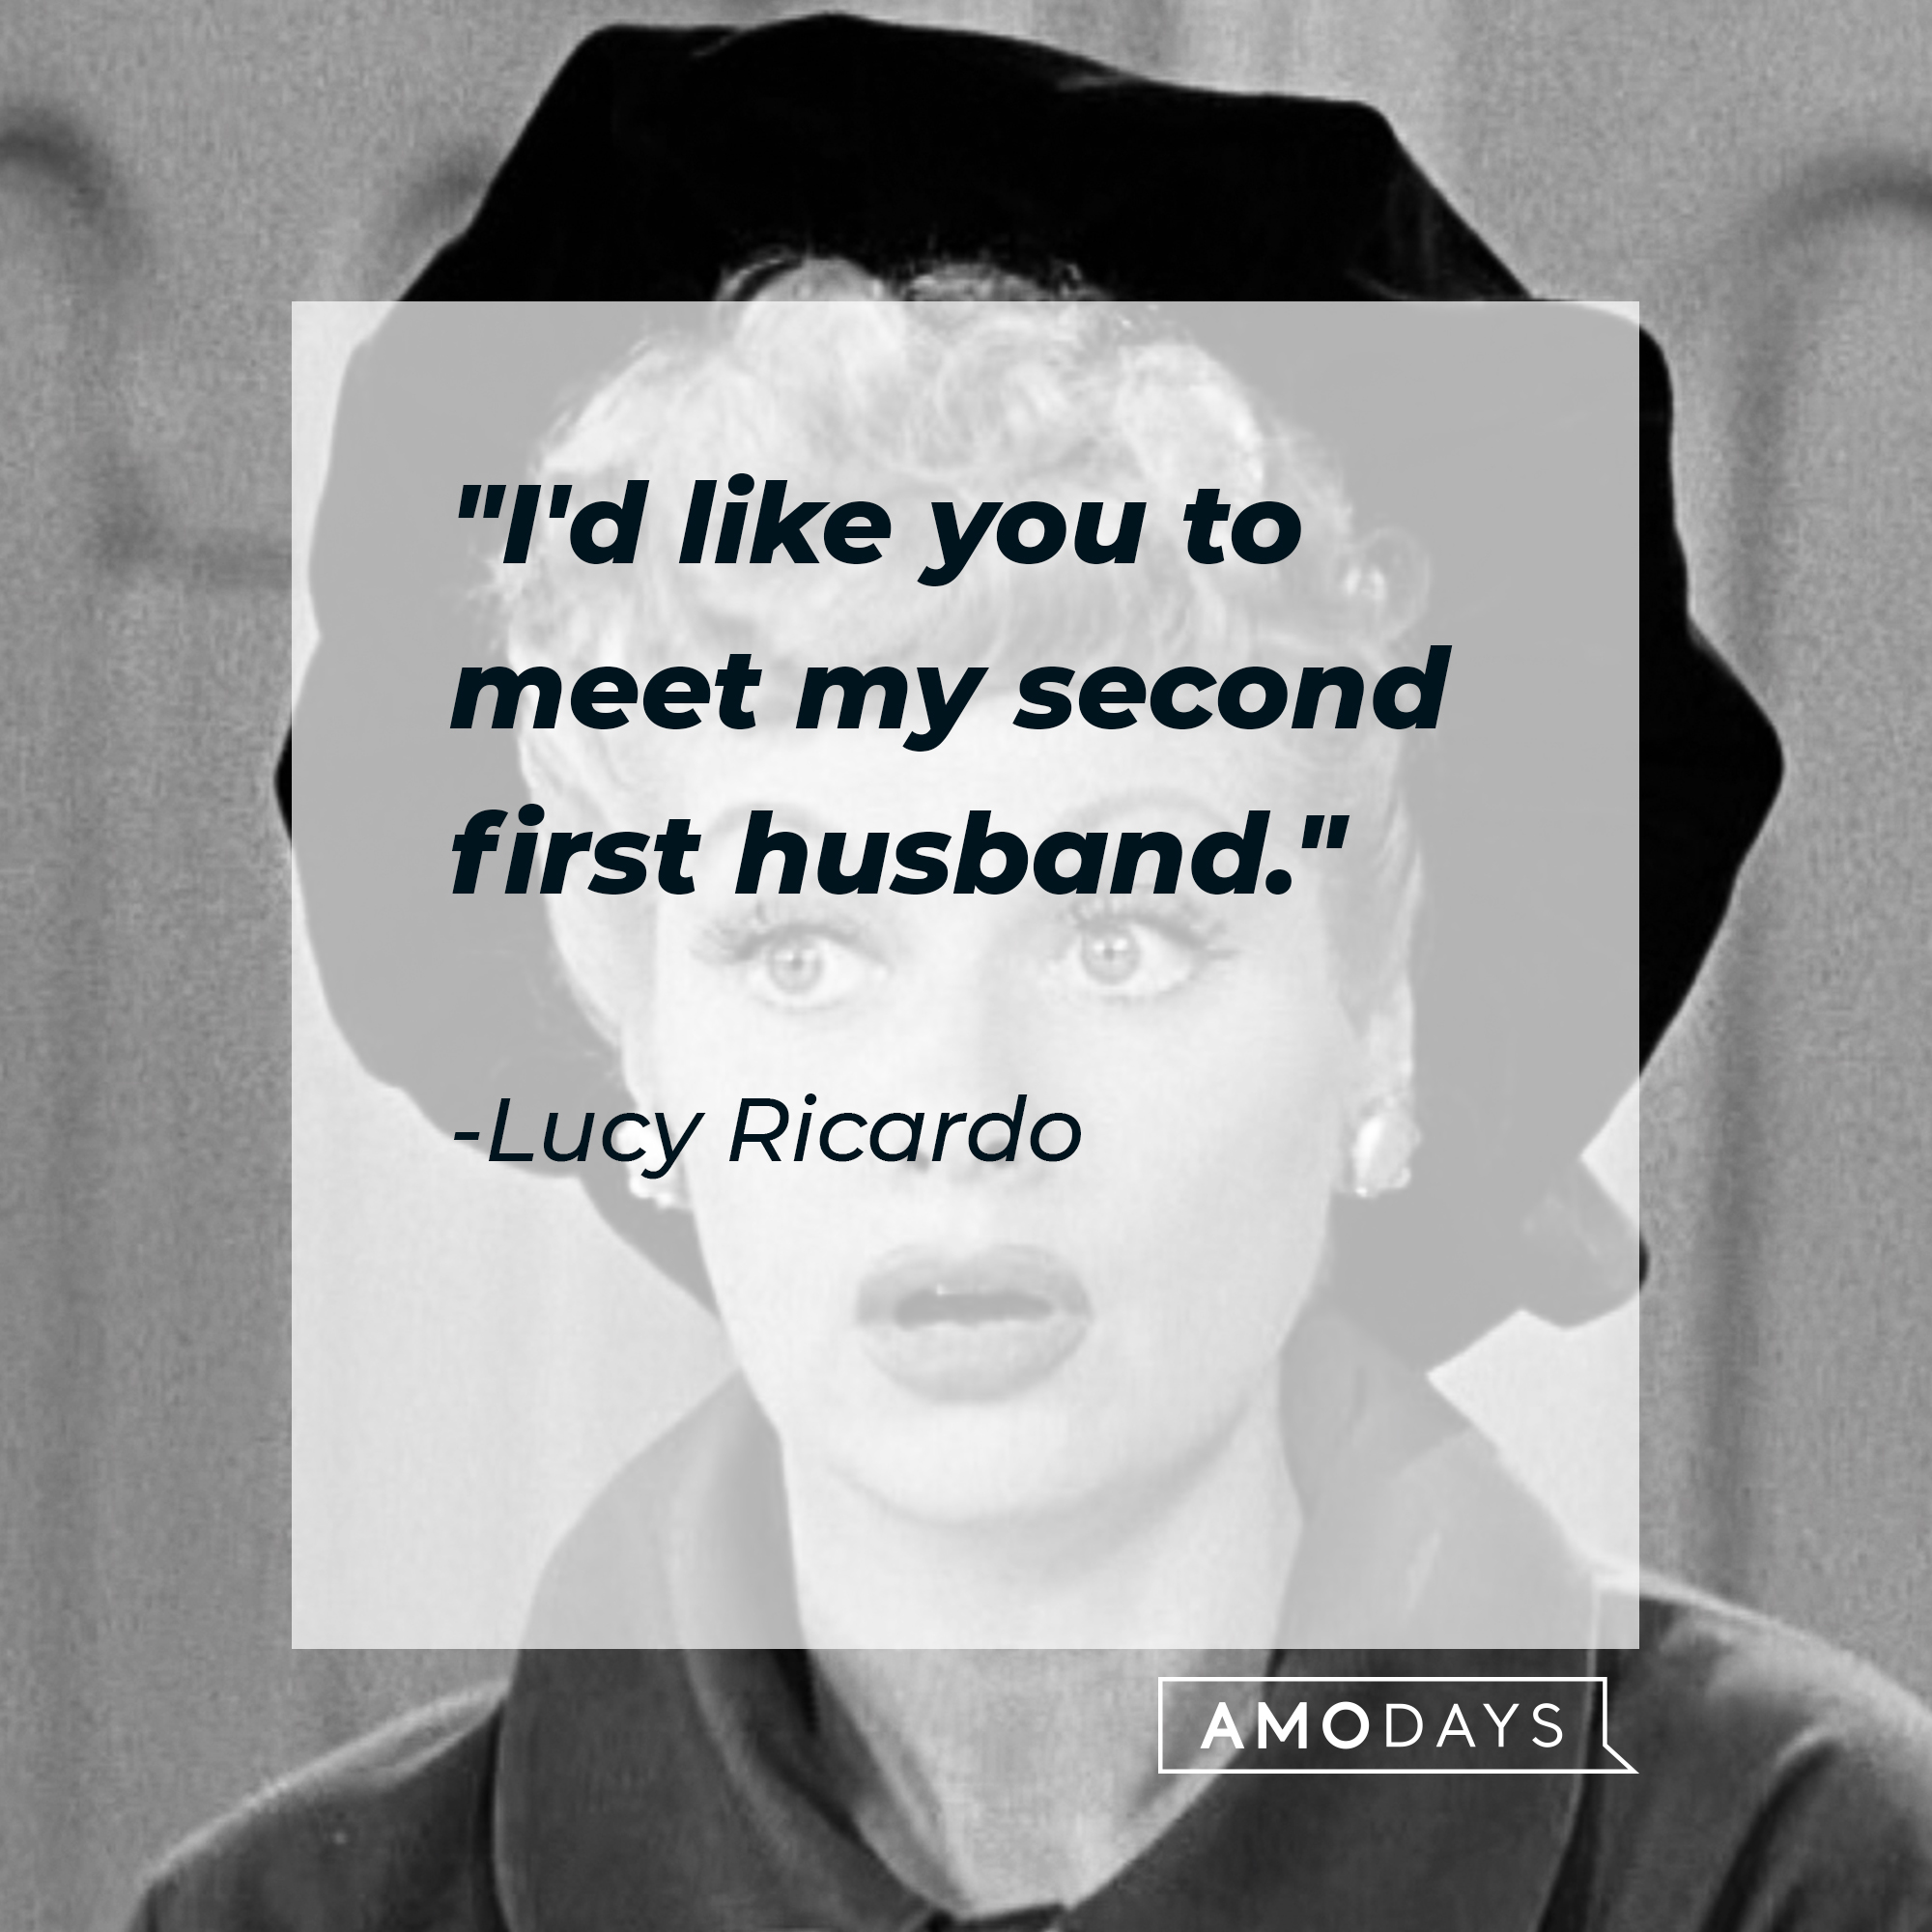 Lucy Ricardo's quote: "I'd like you to meet my second first husband." | Source: Getty Images